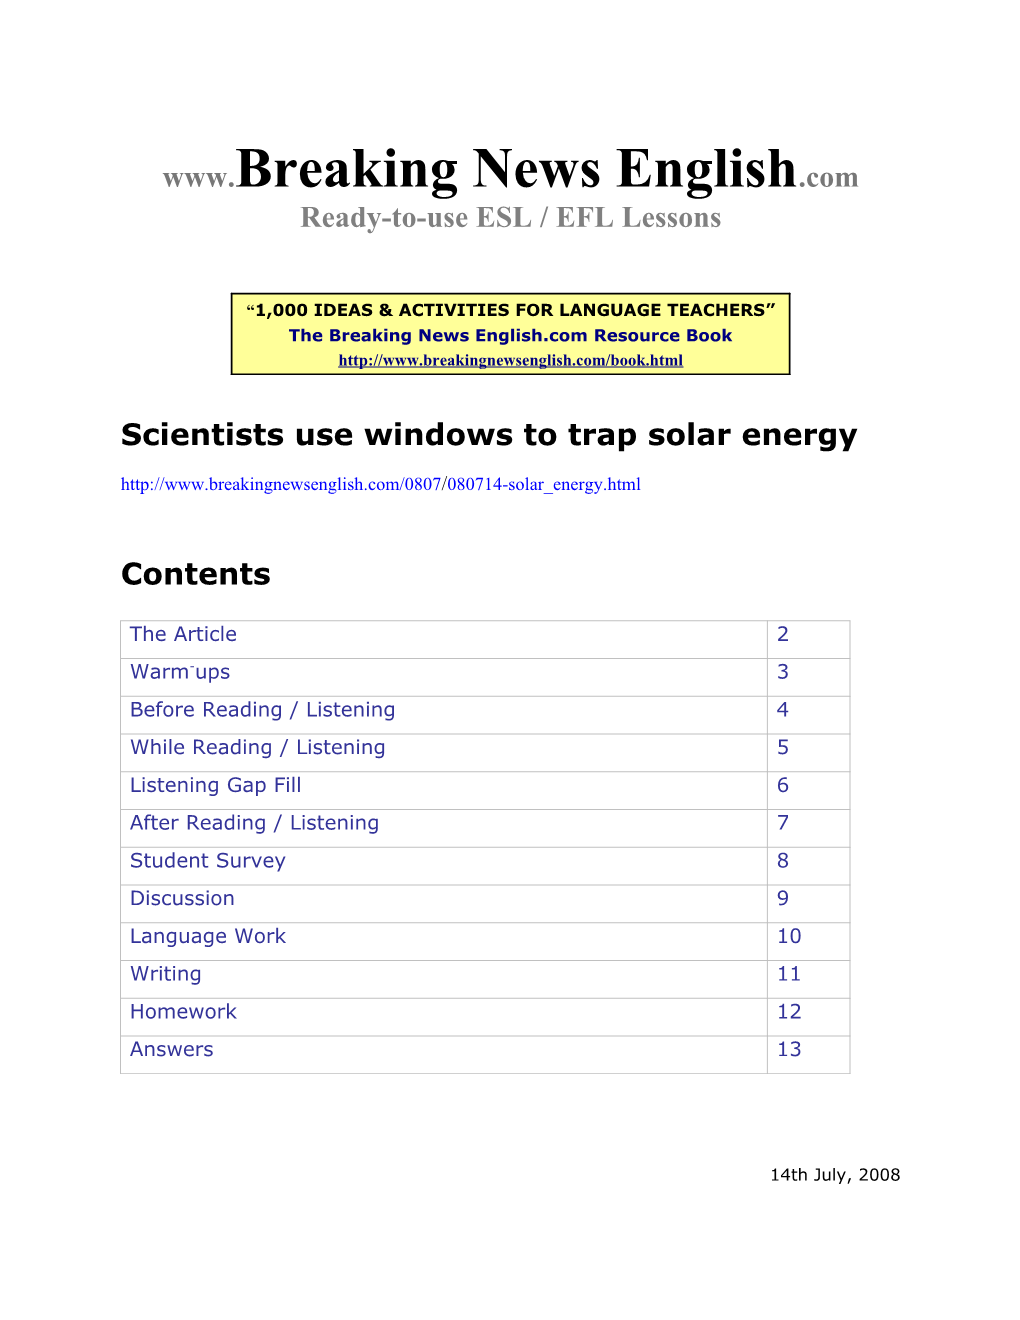 ESL Lesson: Scientists Use Windows to Trap Solar Energy